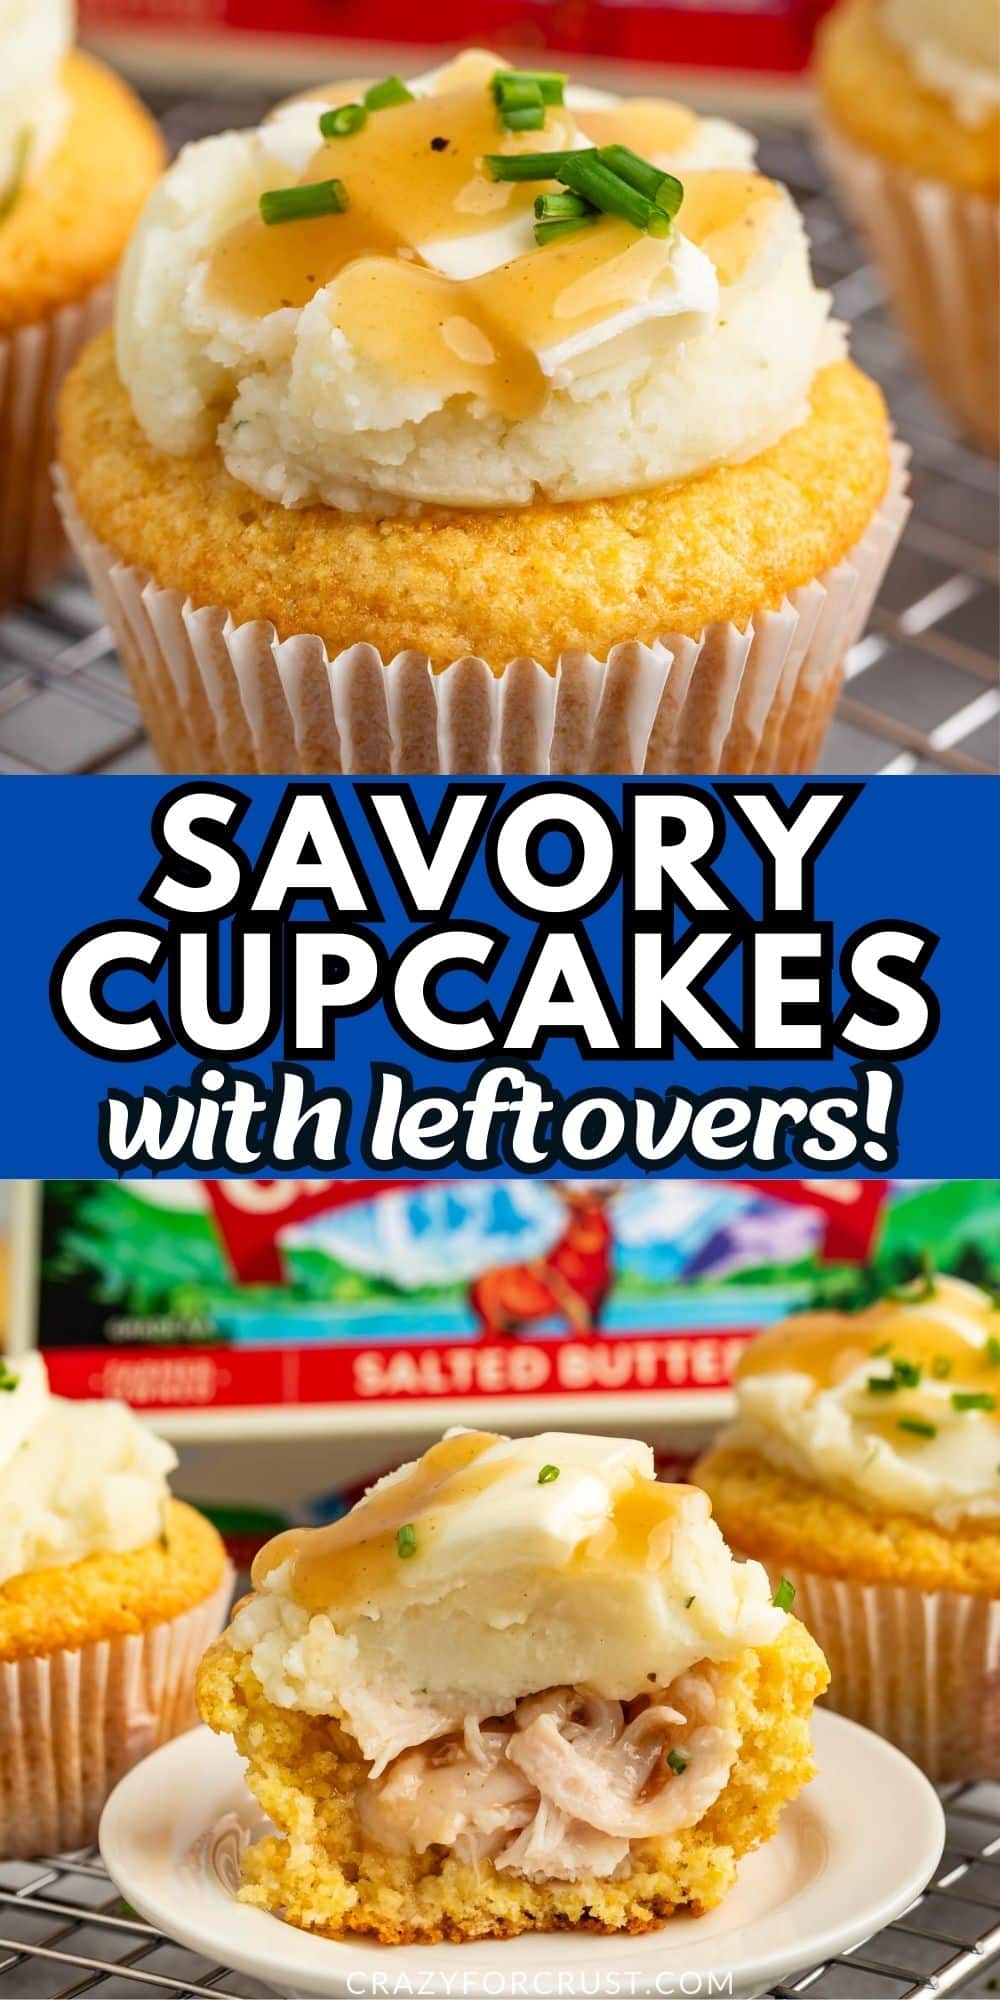 photo showing cupcake with mashed potato frosting and gravy and chives on top and second photo showing cut in half cupcake with turkey inside.